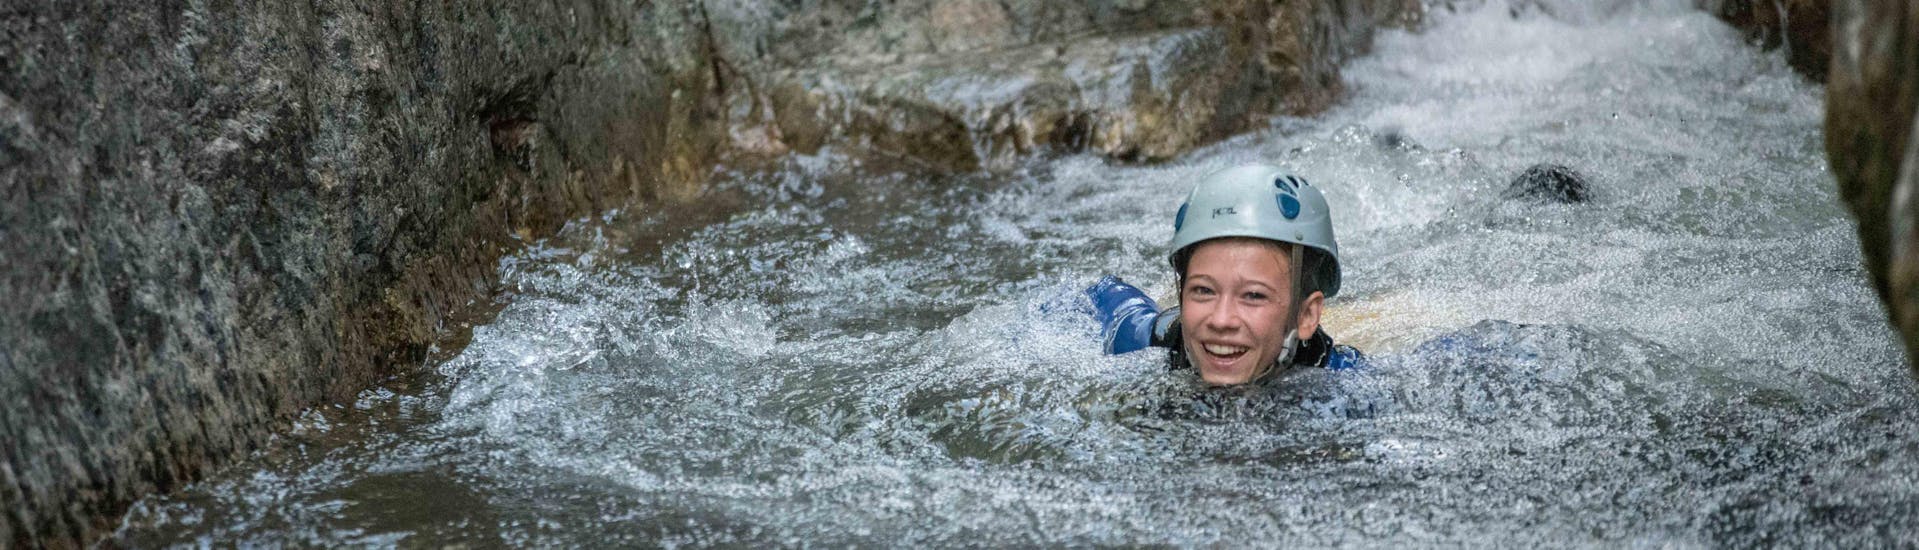 canyoning-classic-canyon-aero-besorgues-les-intraterrestres-hero